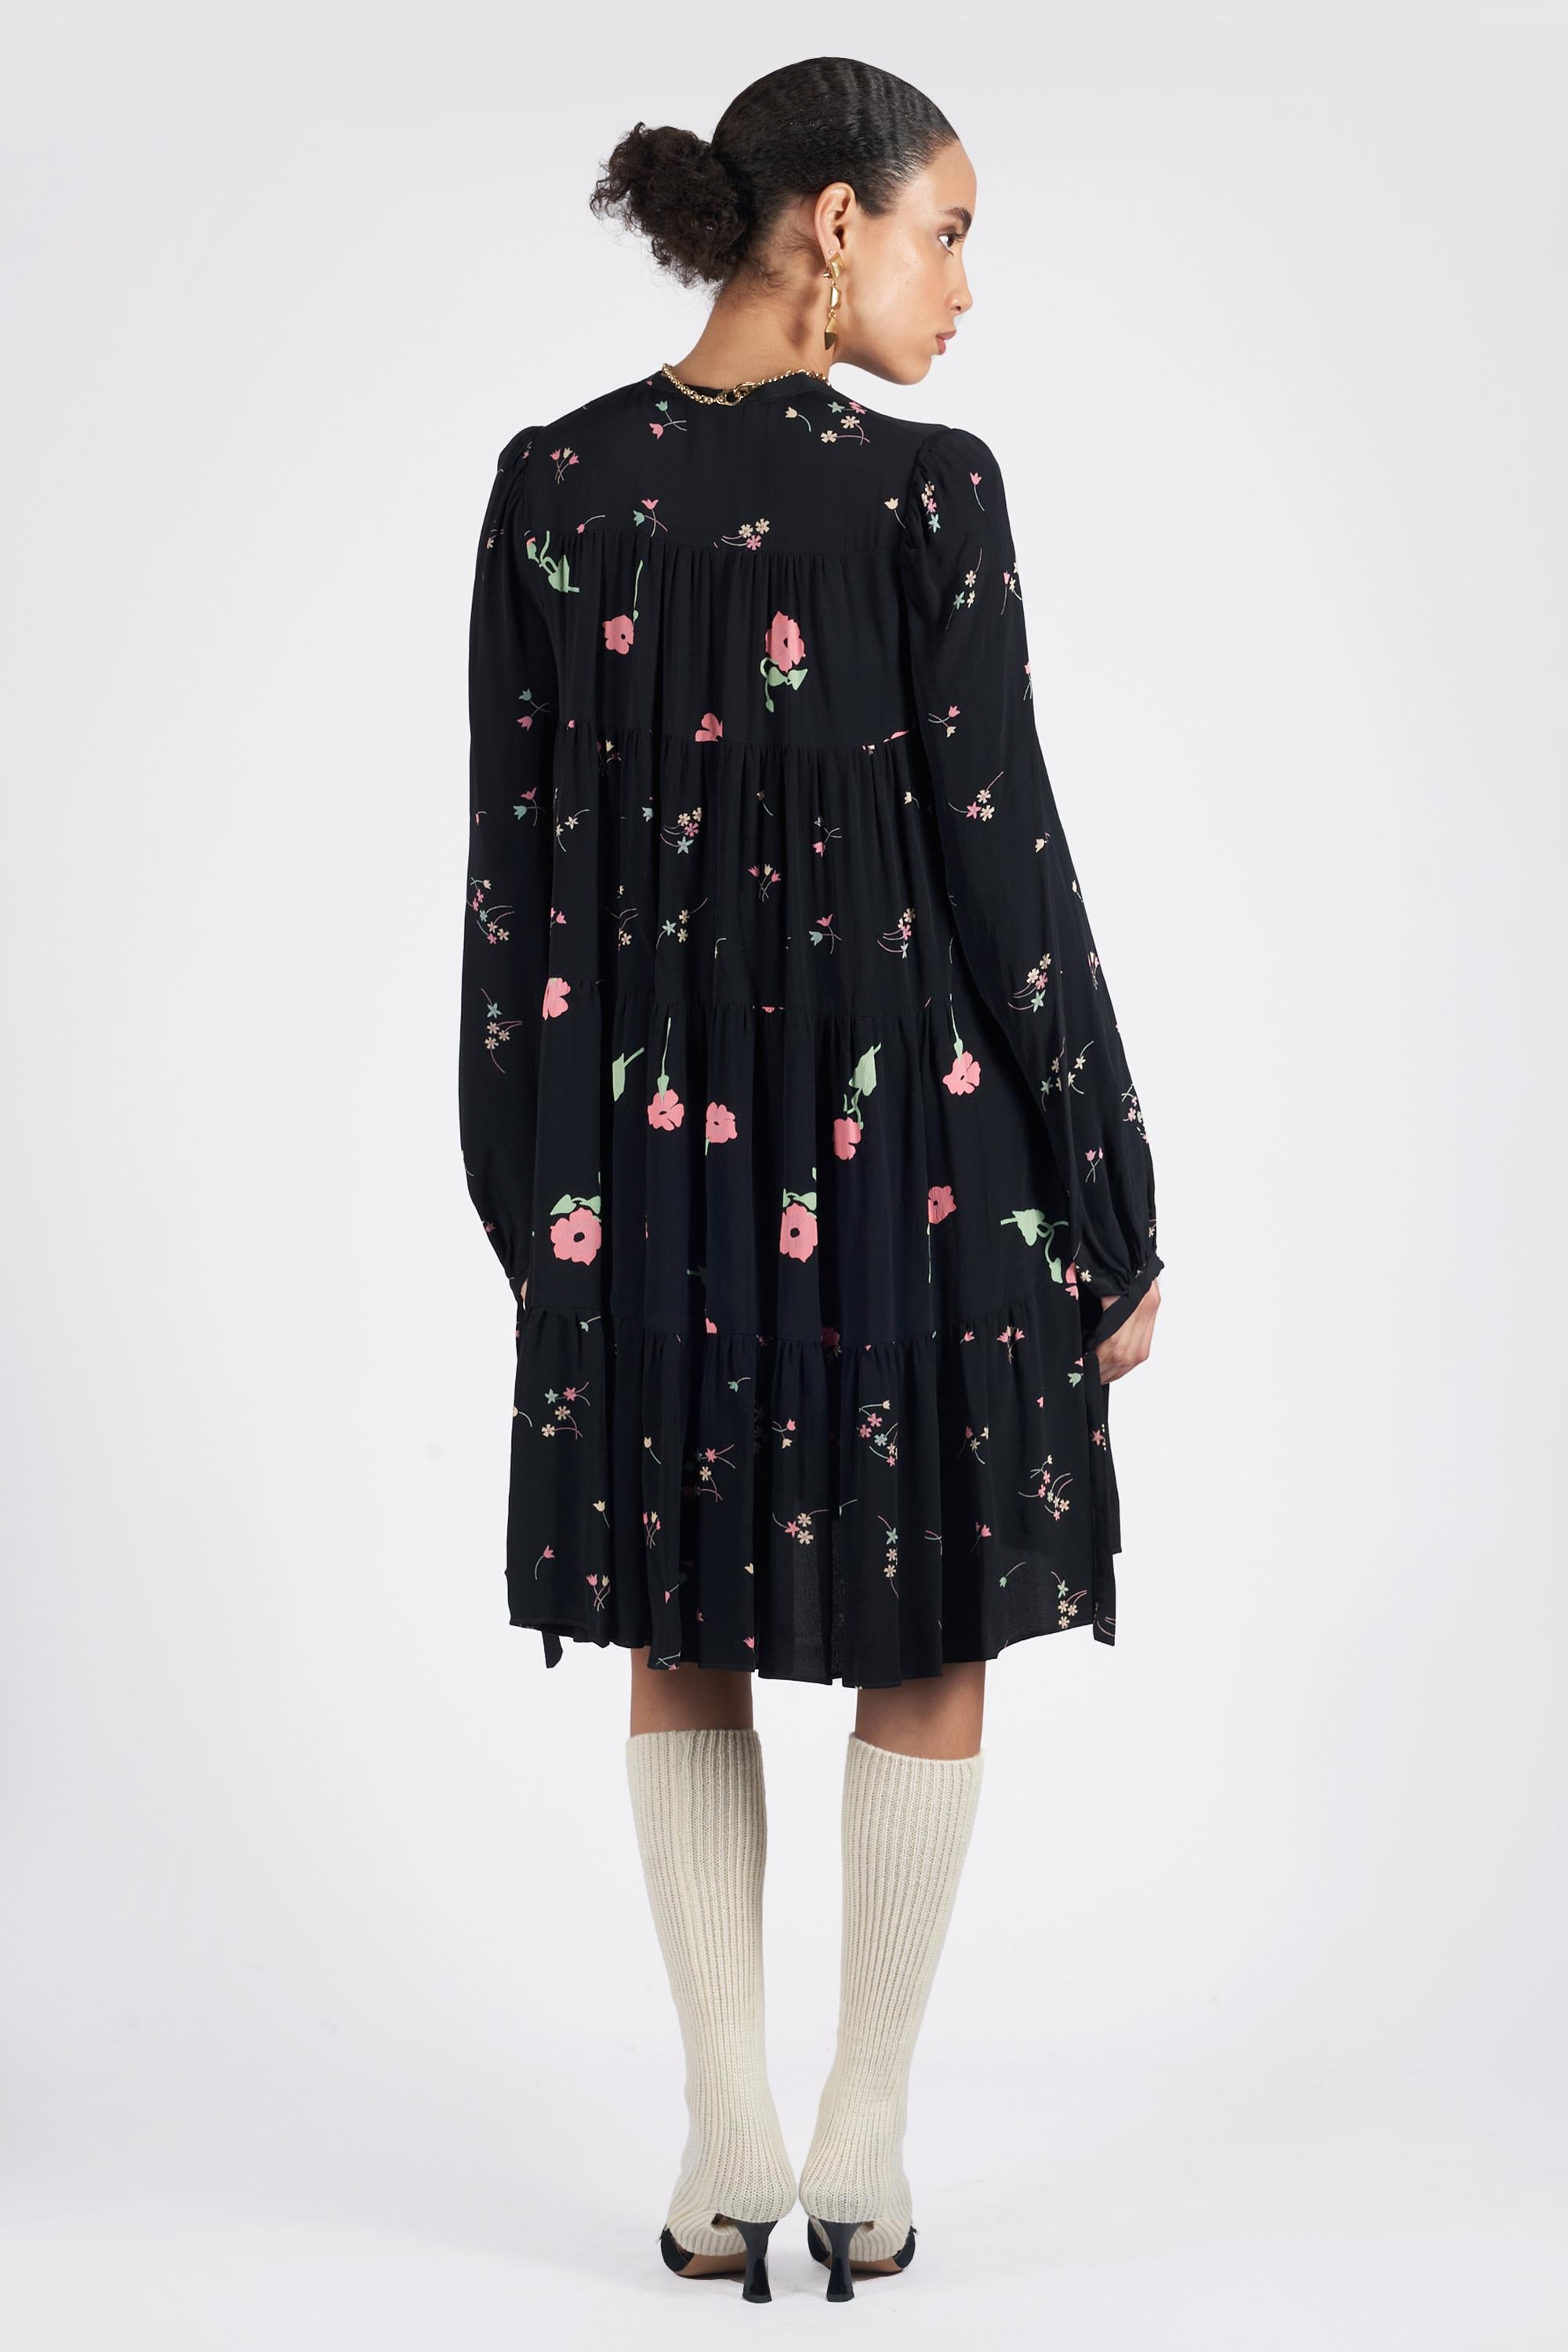 We are very excited to present this Ossie Clark 1970’s long sleeve swing dress. Features floral pattern, tie neck, wide silhouette with long sleeves and midi length. Print by Celia Birtwell. In excellent vintage condition.
Authenticity